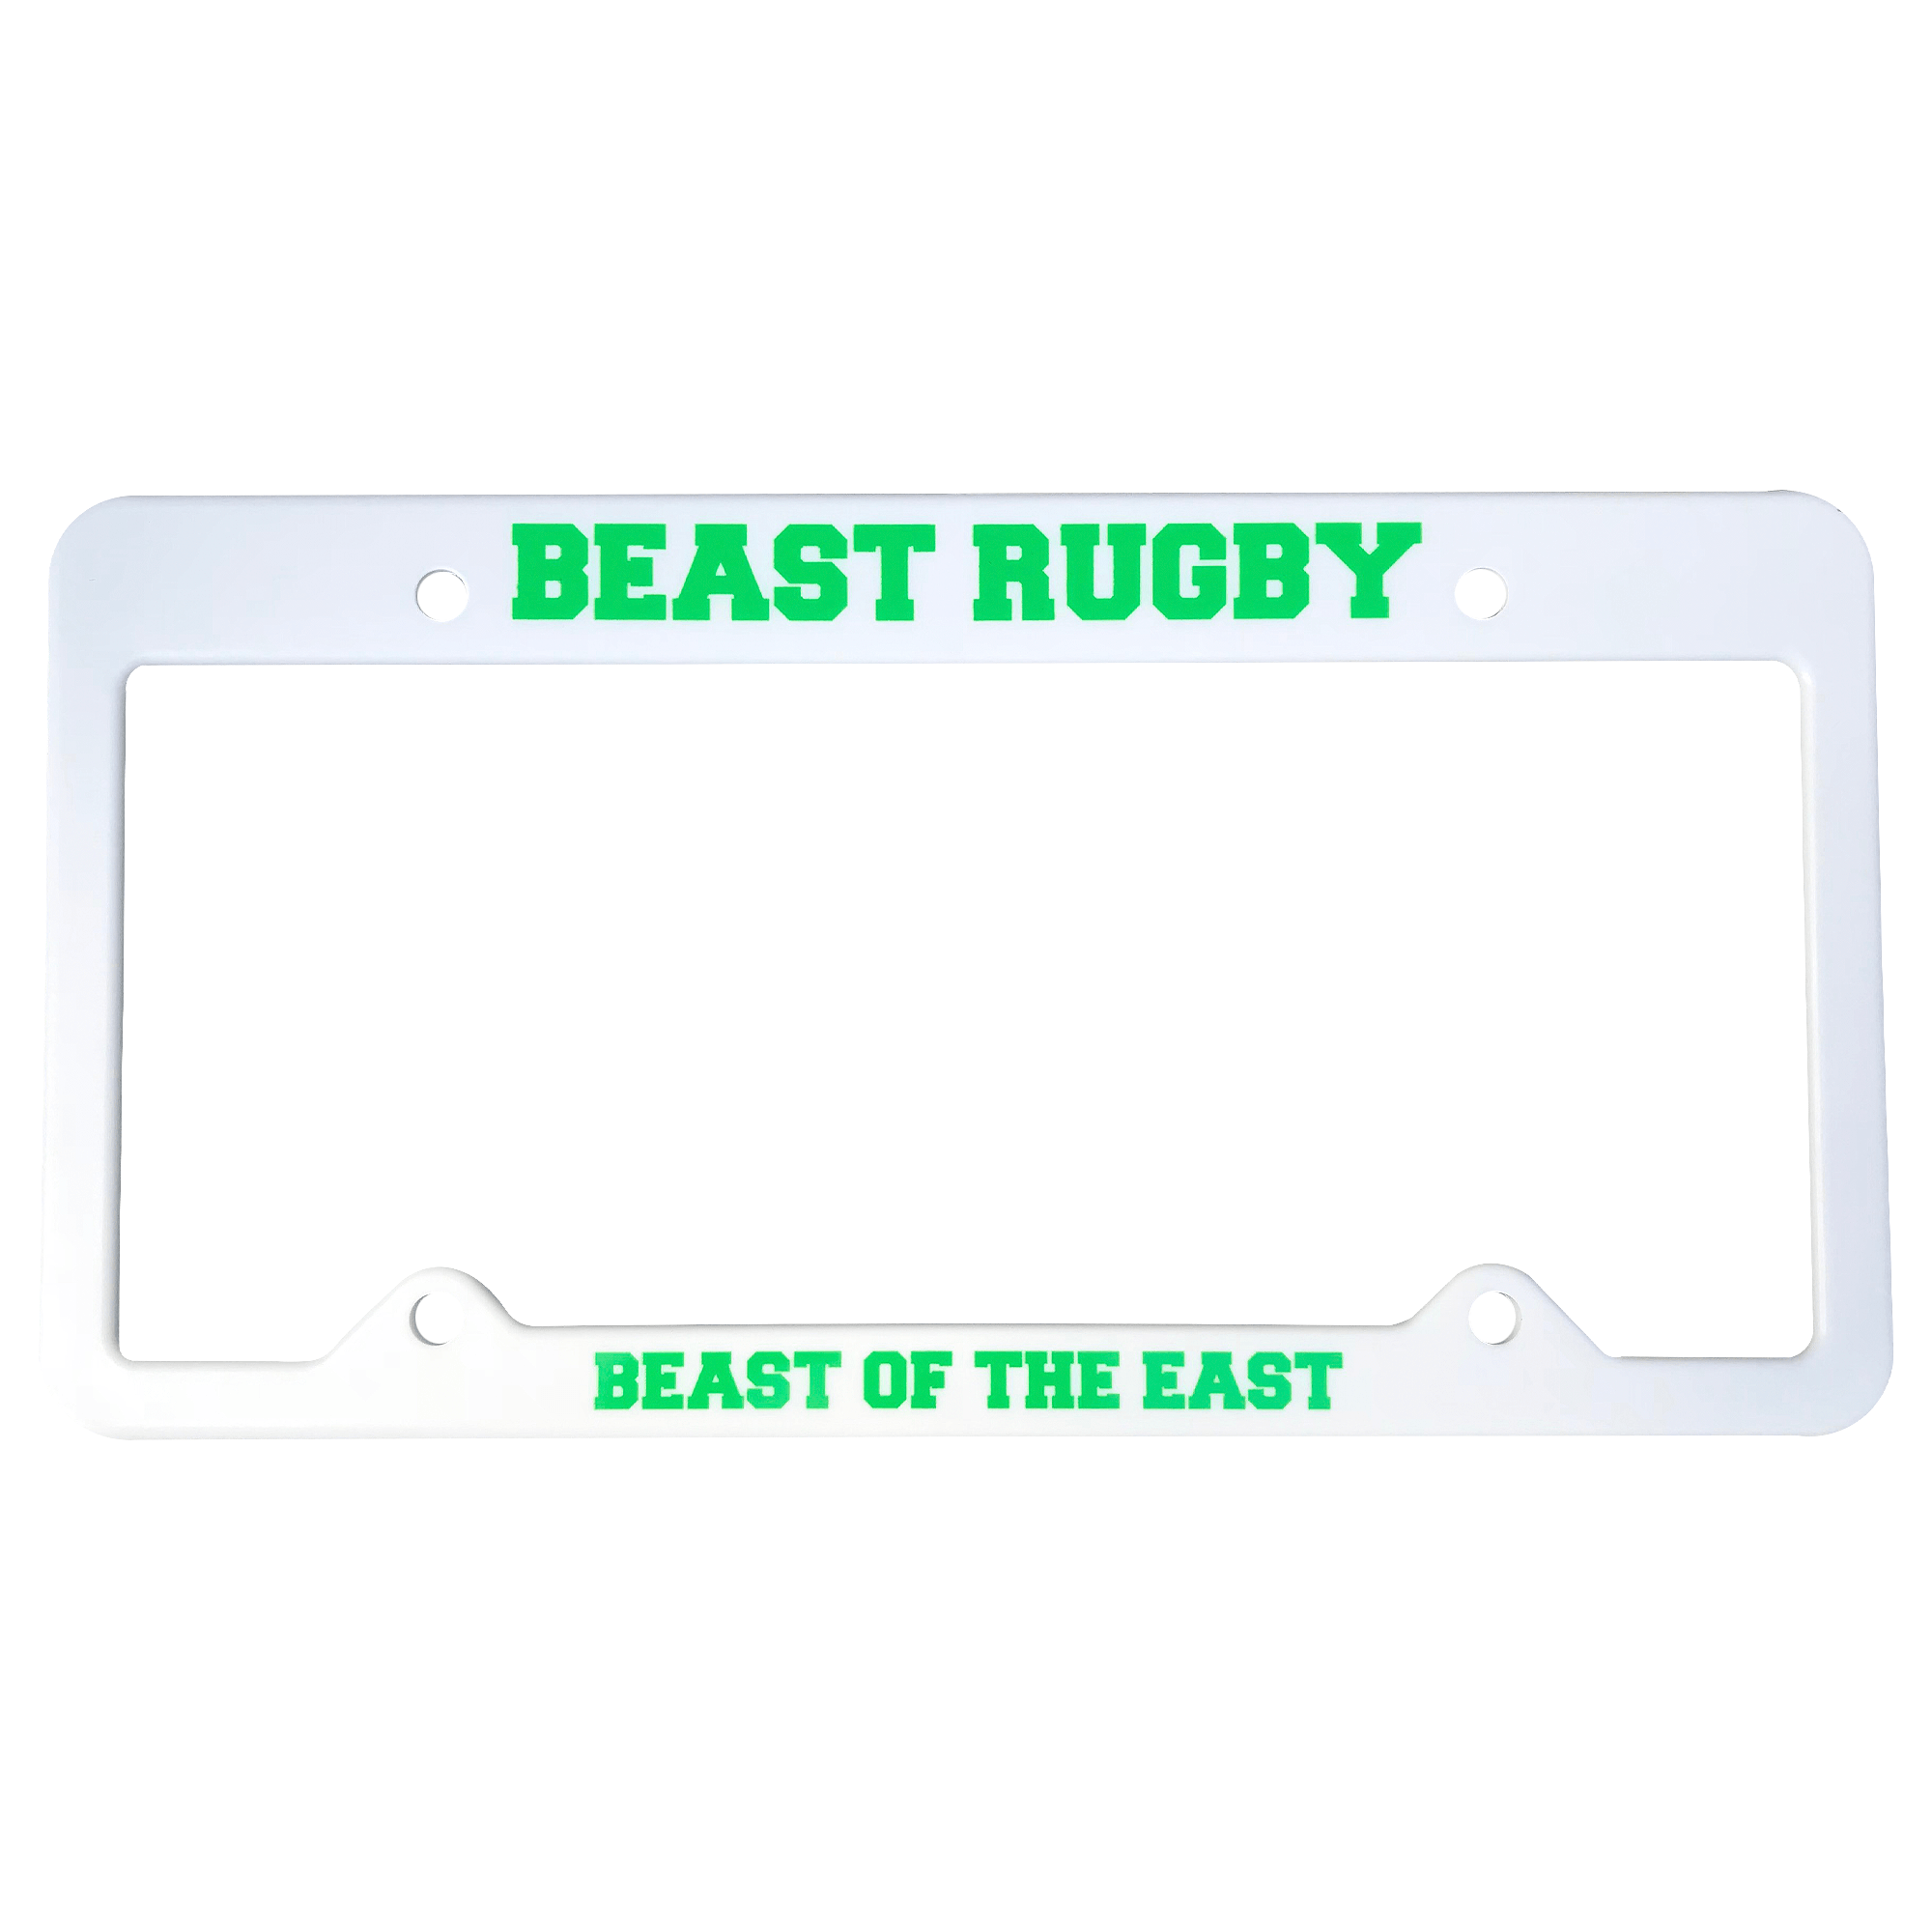 Rugby Imports Beast of the East License Plate Frame